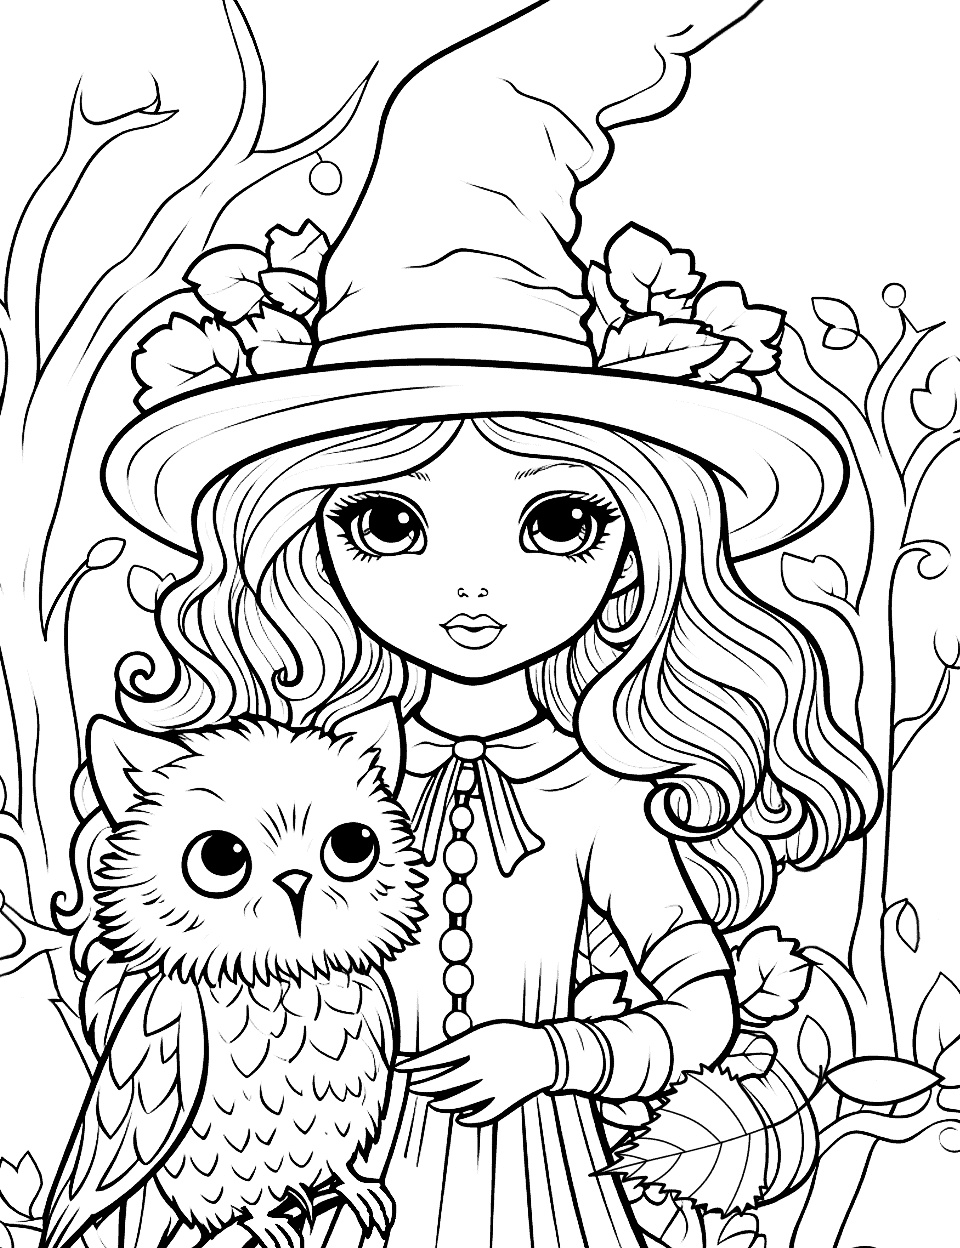 Witch's Pet Owl Witch Coloring Page - A witch with her owl in a mystical forest.